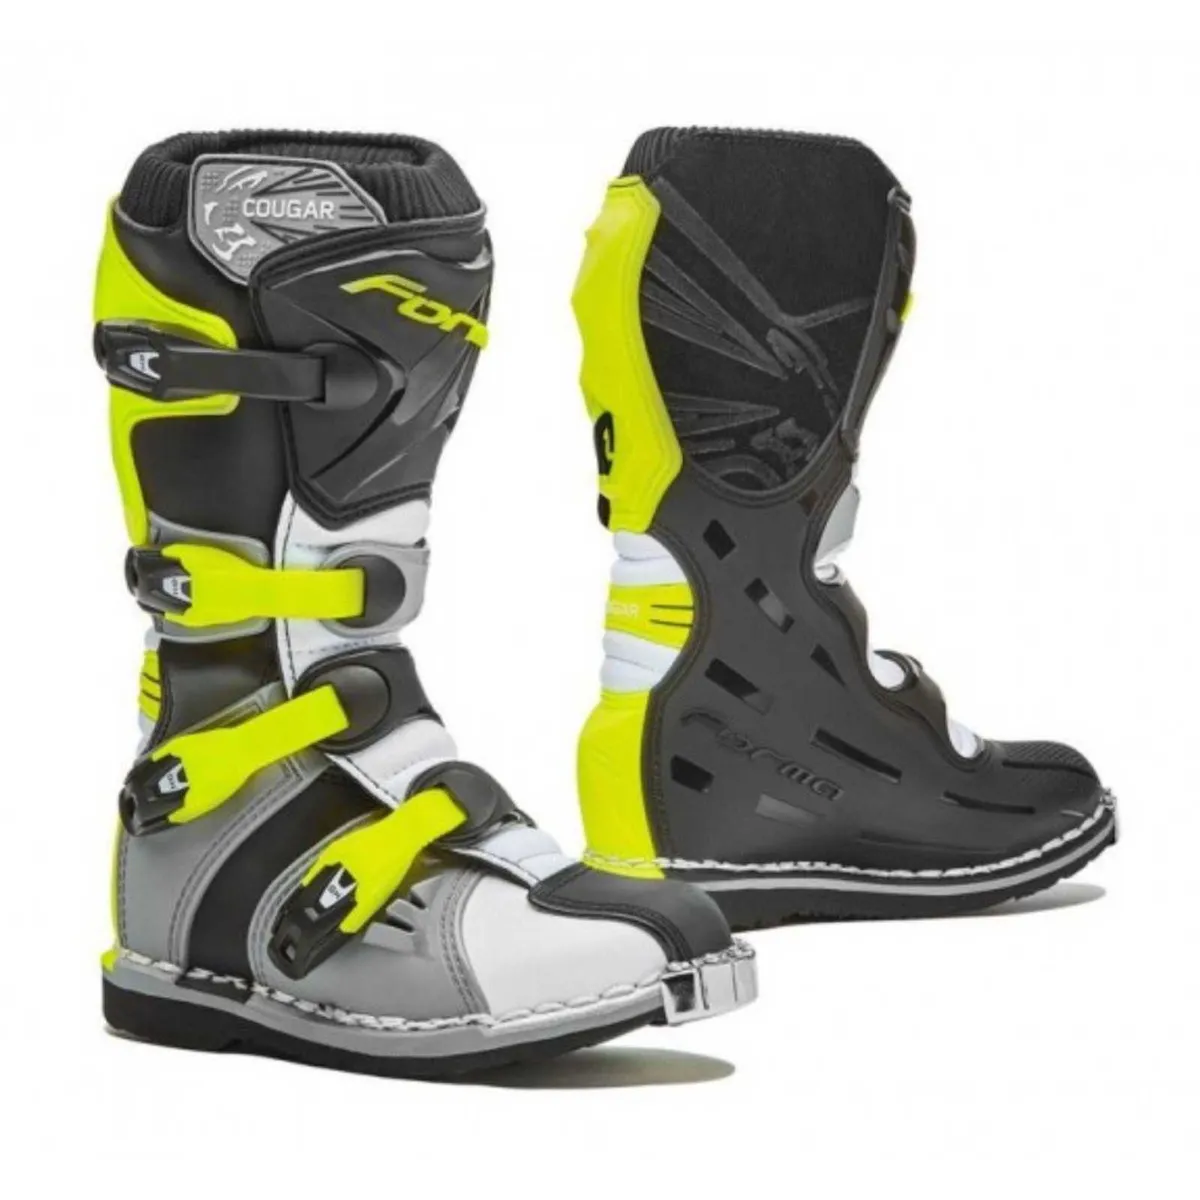 FORMA COUGAR KIDS MX BOOTS - Image 1